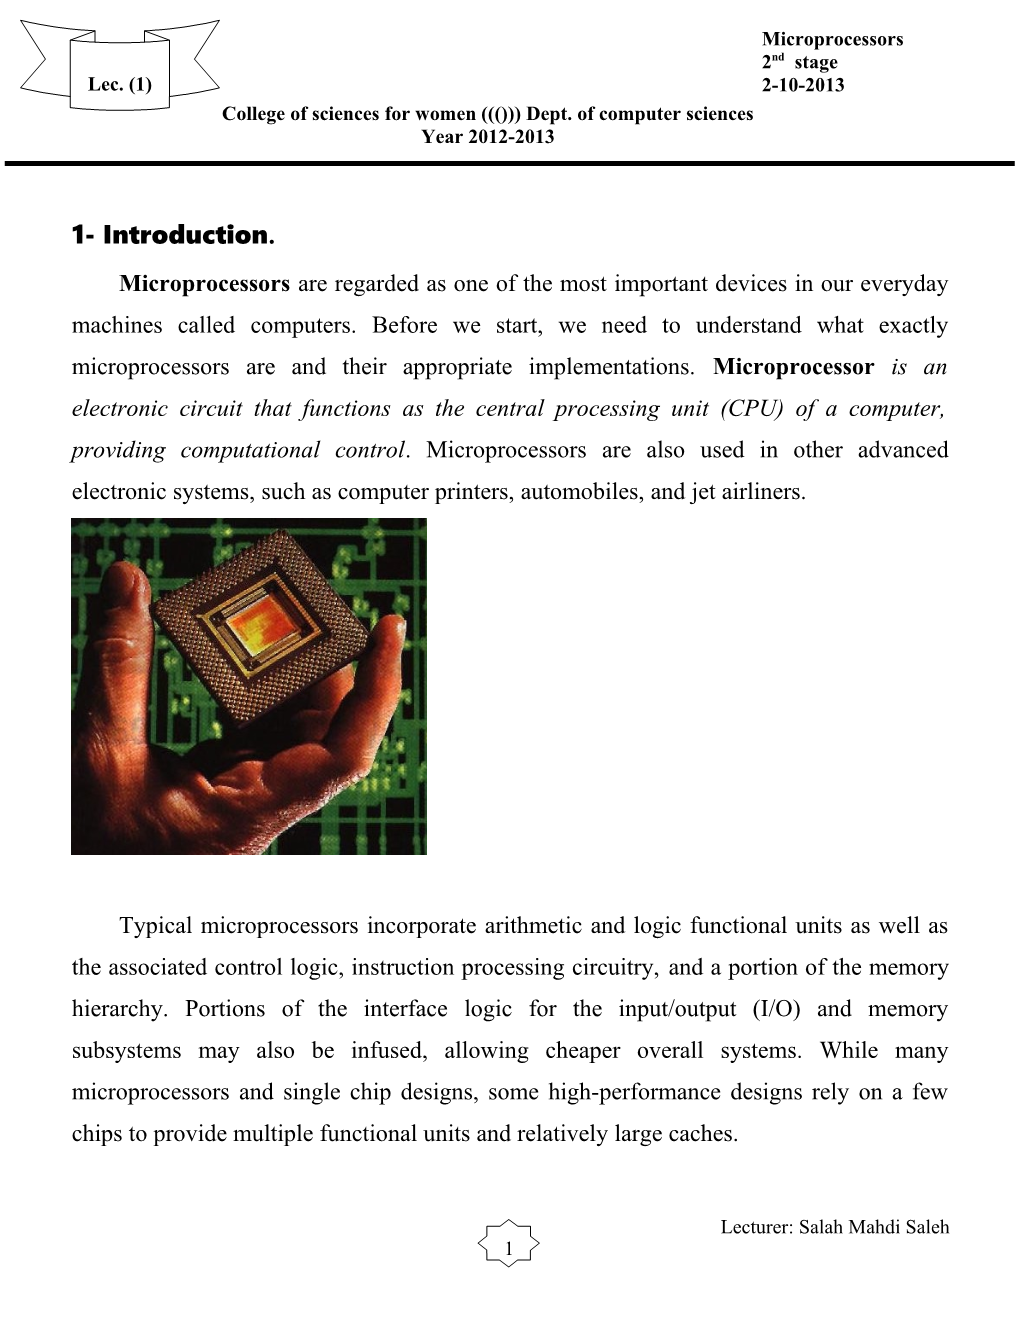 Microprocessors Are Regarded As One of the Most Important Devices in Our Everyday Machines